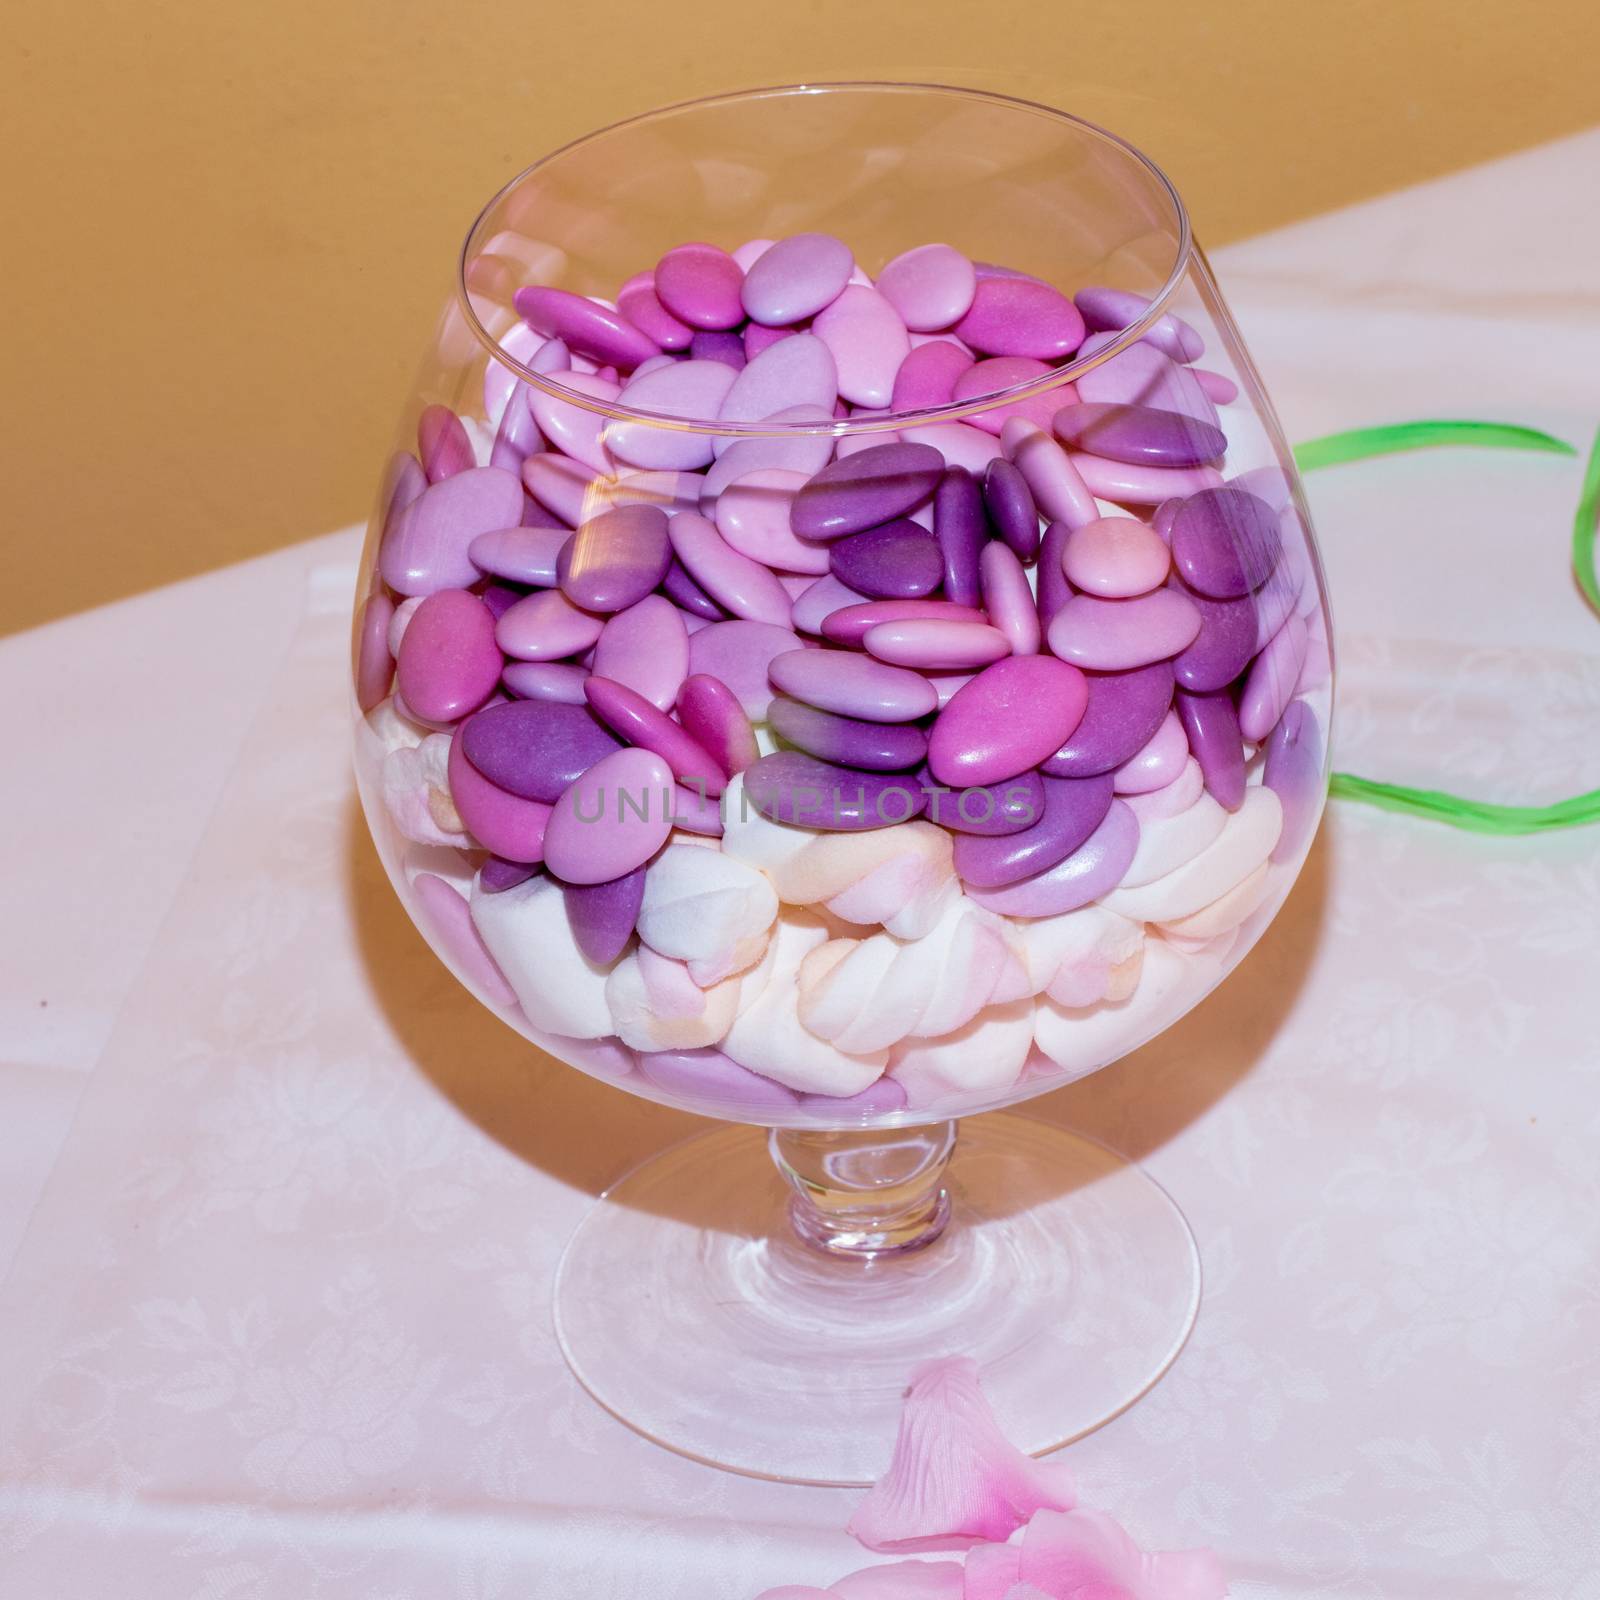 Glass vase full of colourful confetti, over a table